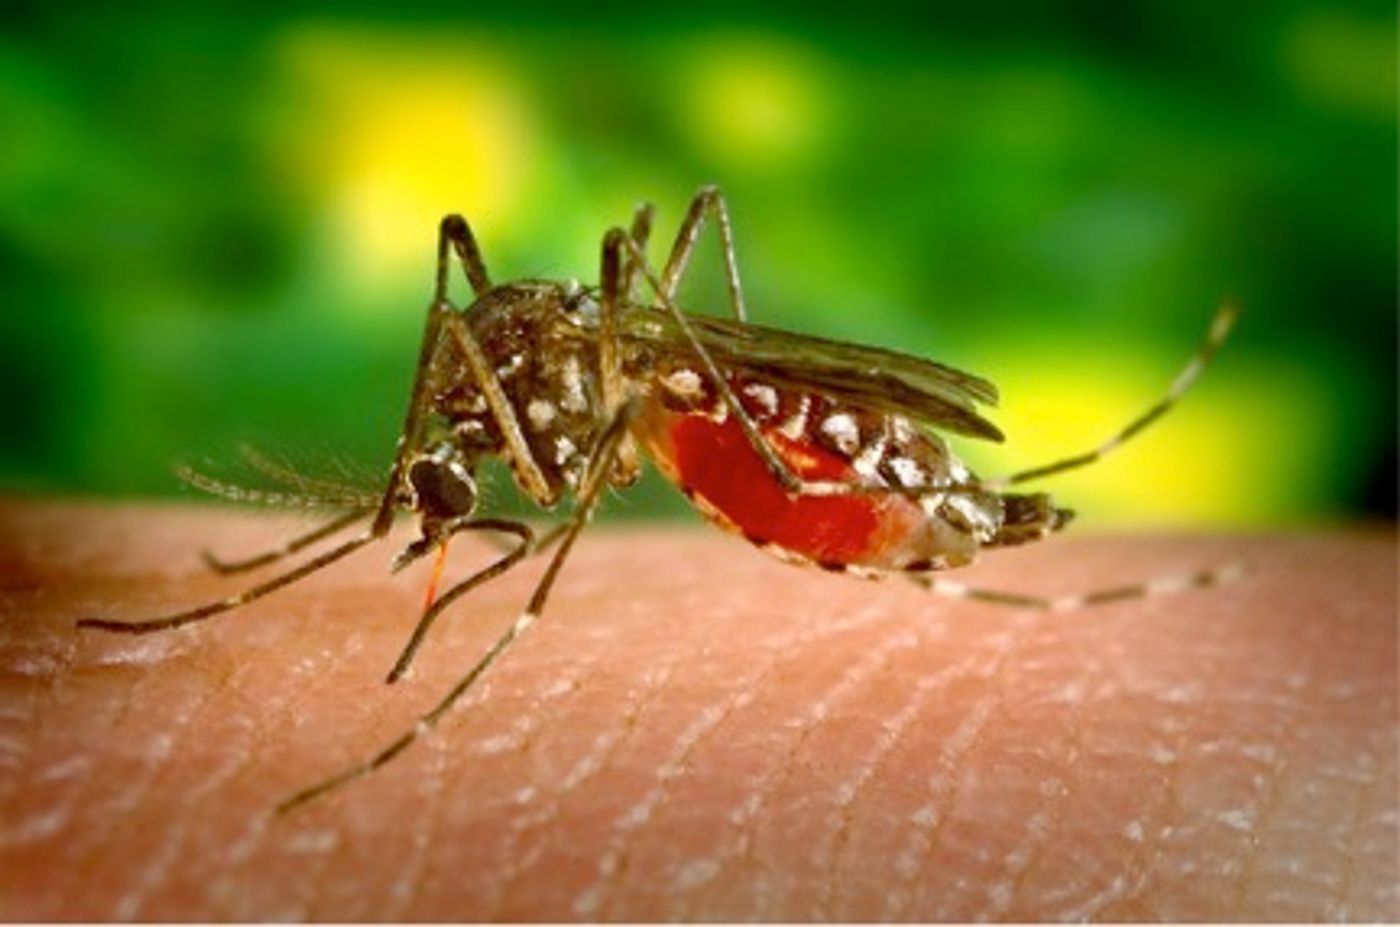 Mosquito-borne disease affecting millions has had no approved vaccine until now